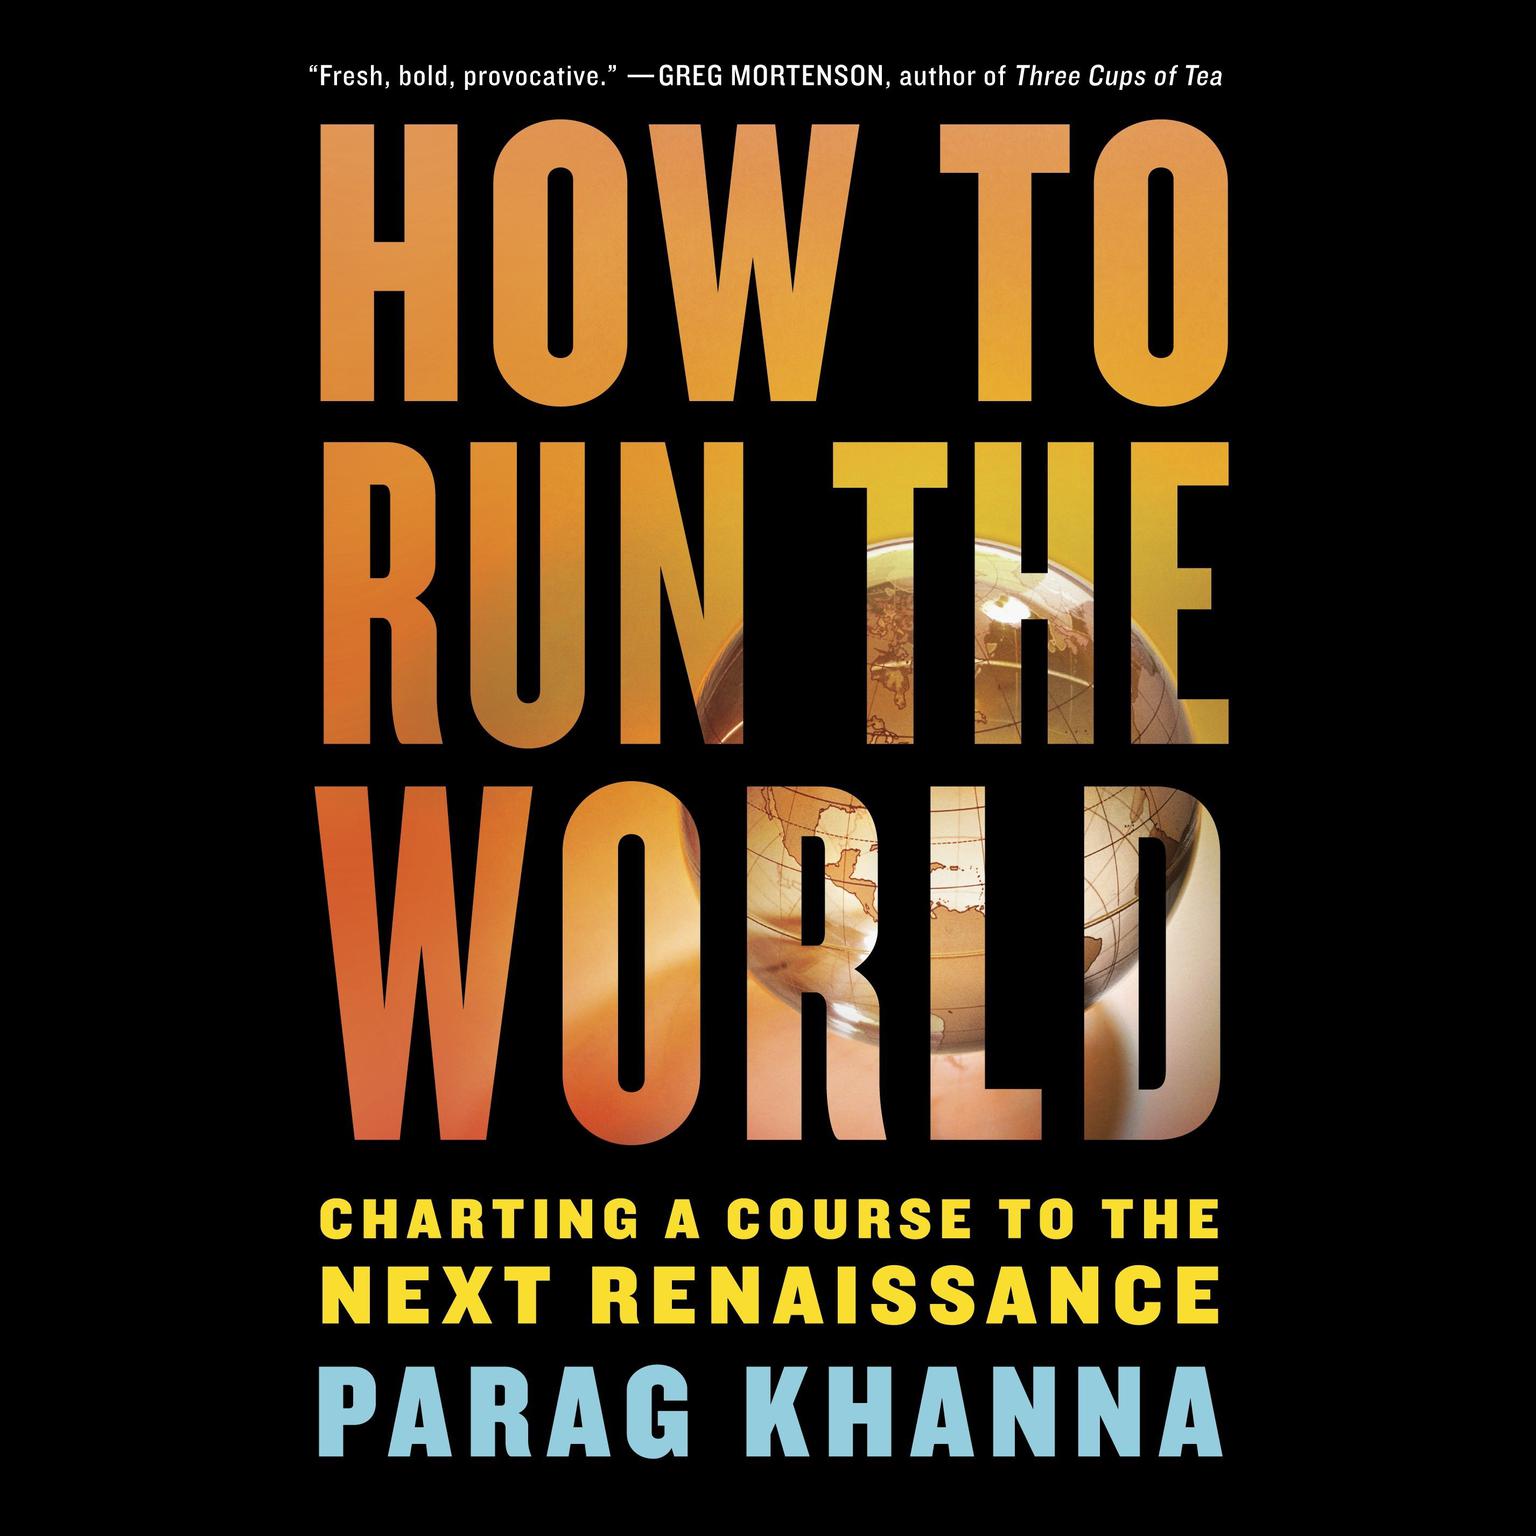 How to Run the World: Charting a Course to the Next Renaissance Audiobook, by Parag Khanna